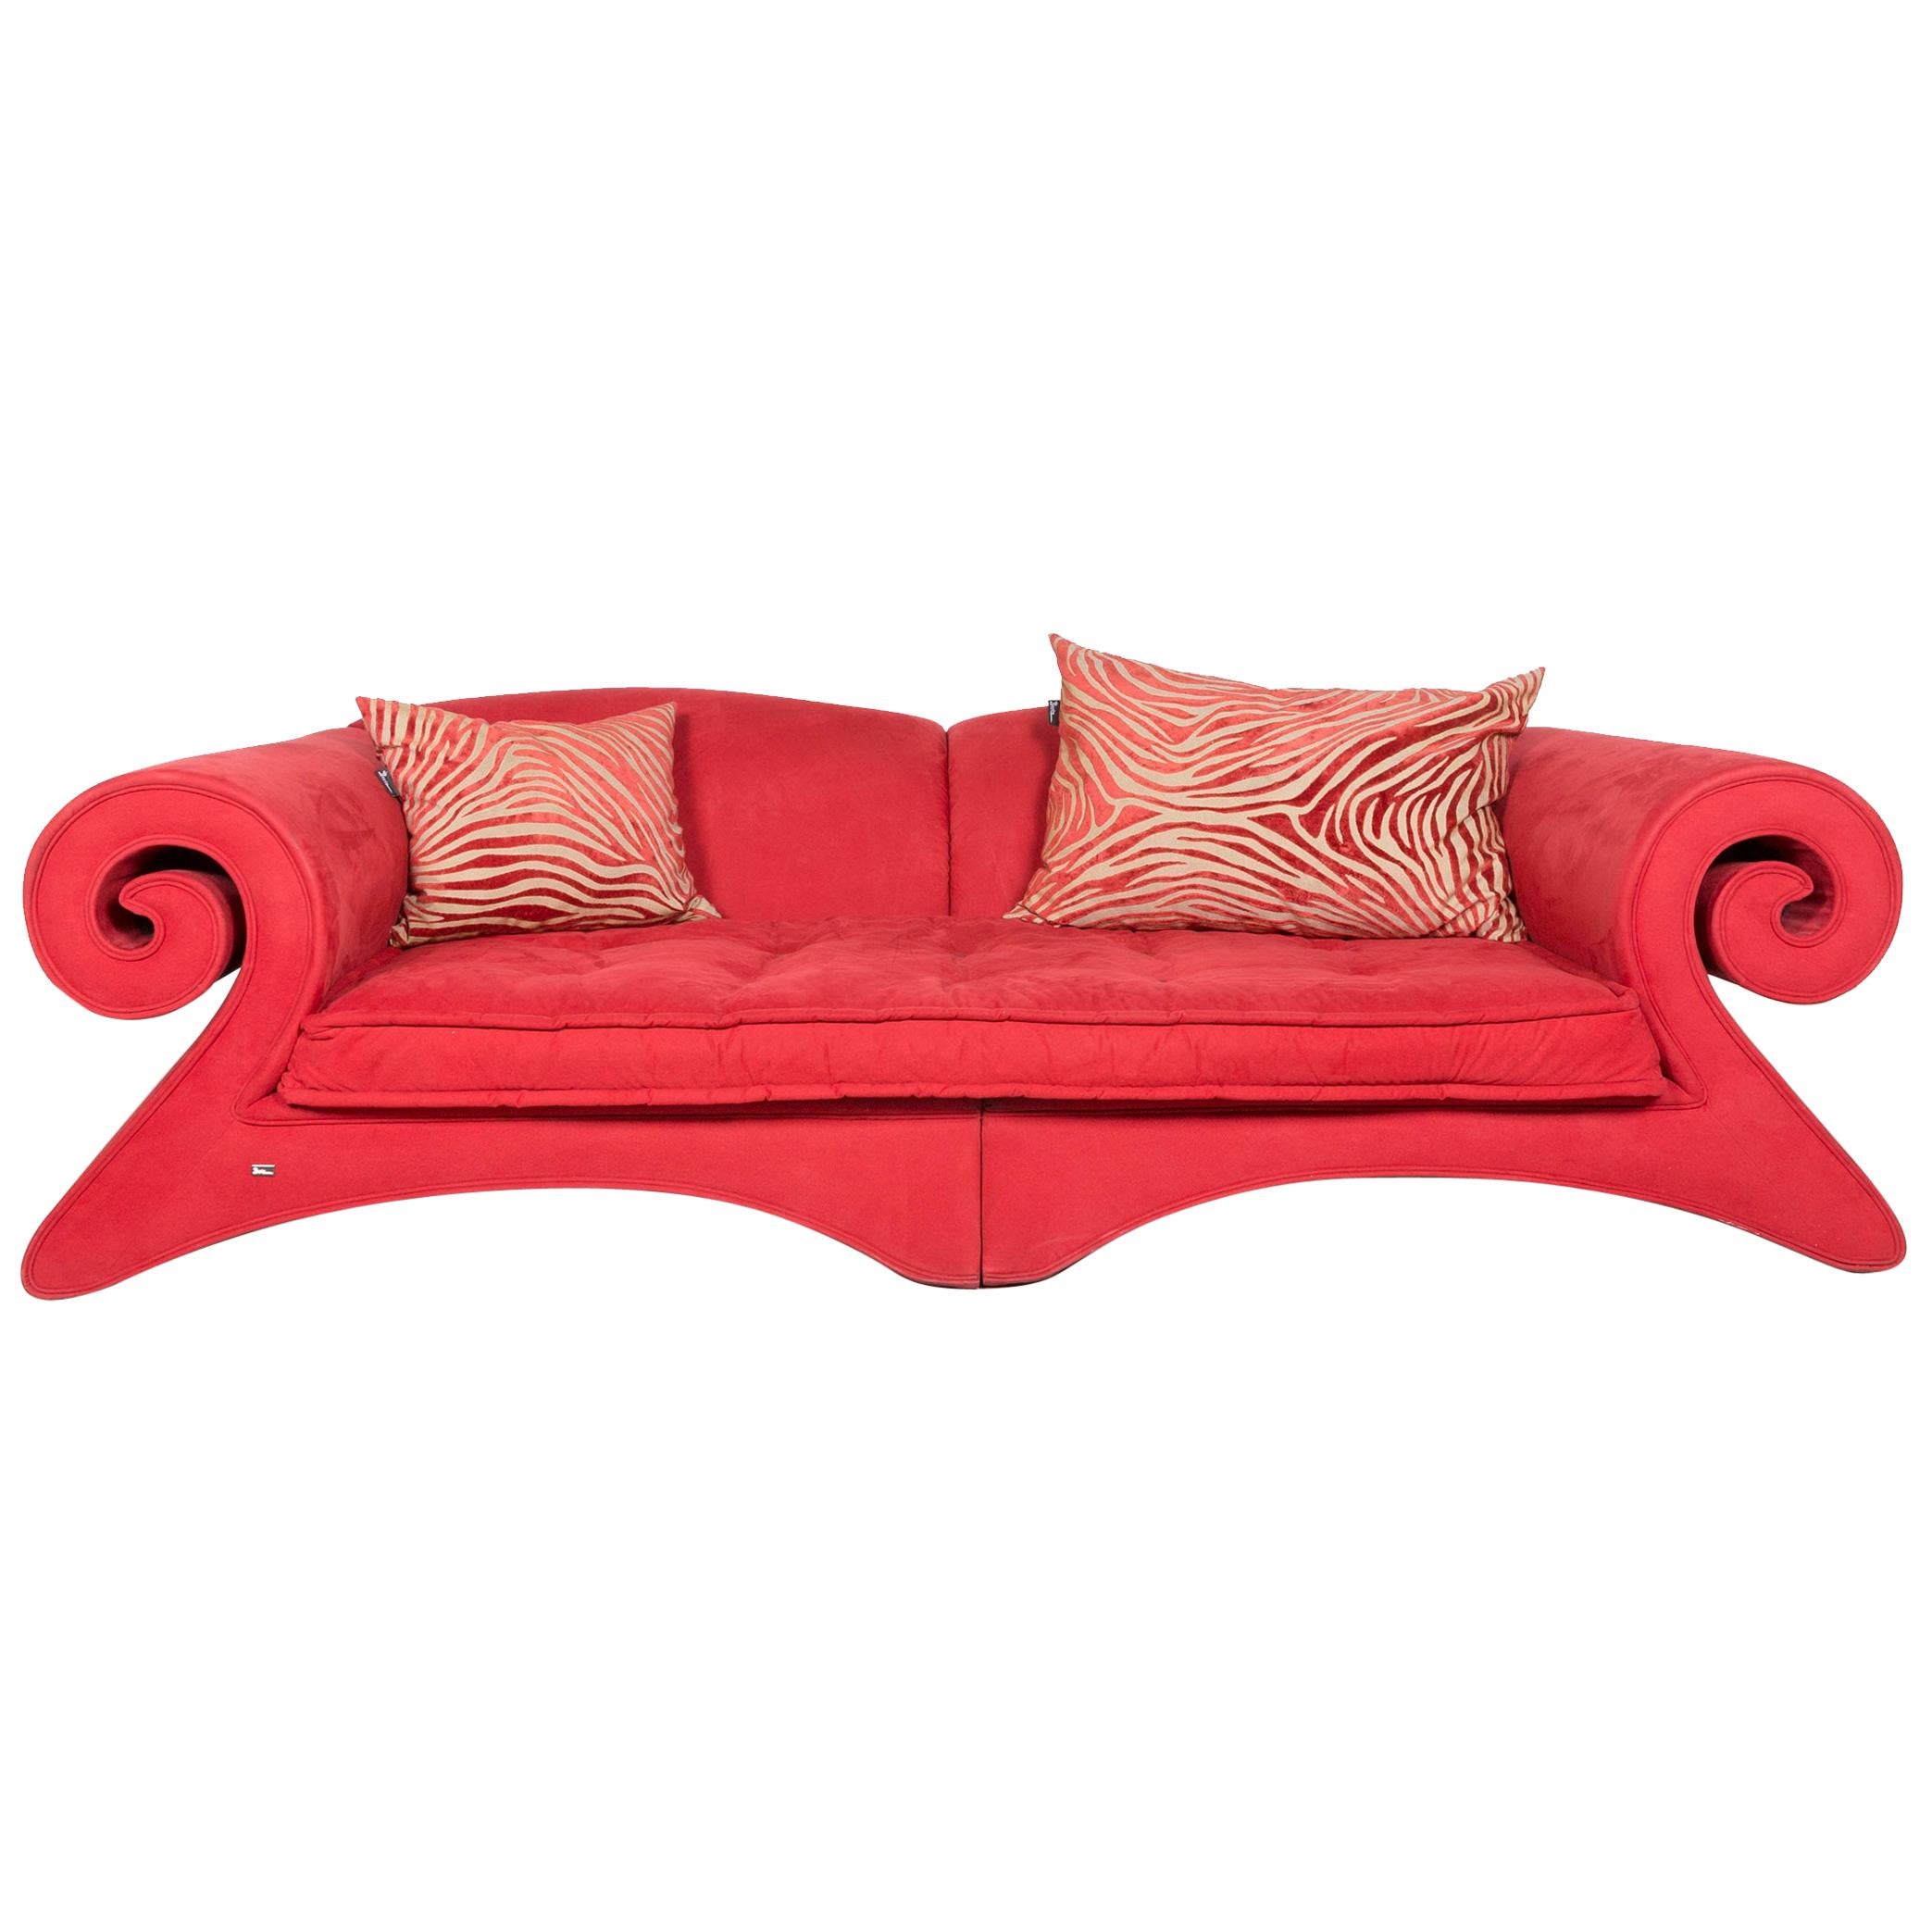 Bretz Mammut G160 Designer Fabric Sofa Red Couch For Sale